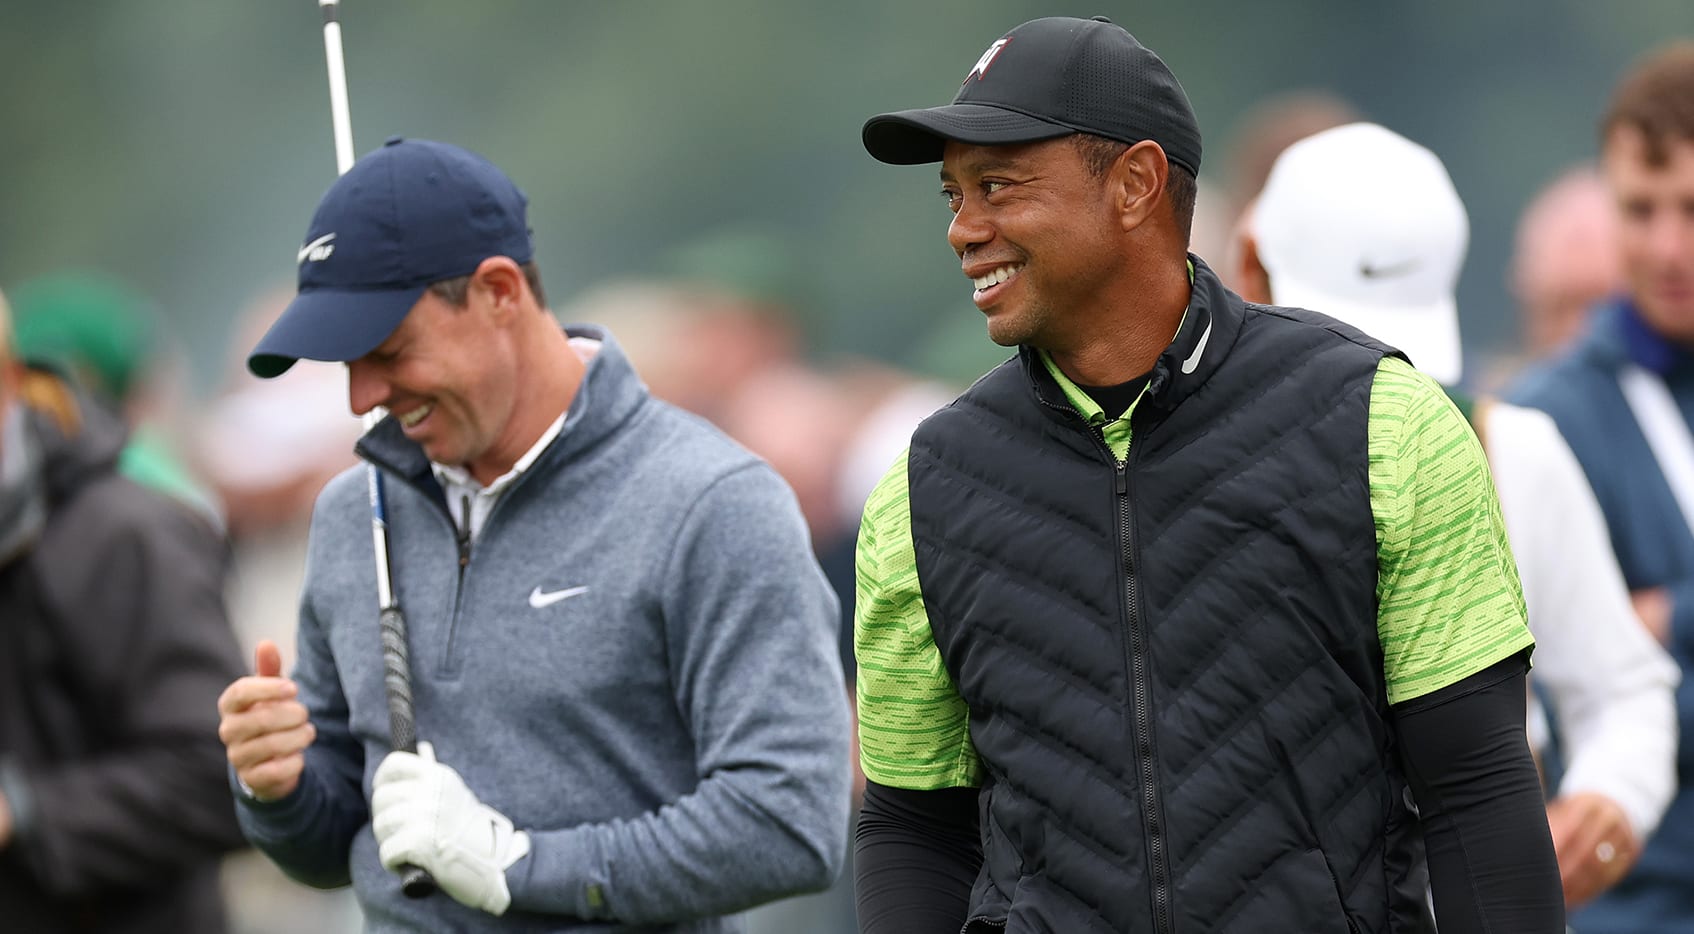 Tiger Woods, Rory McIlroy play Ballybunion before The Open